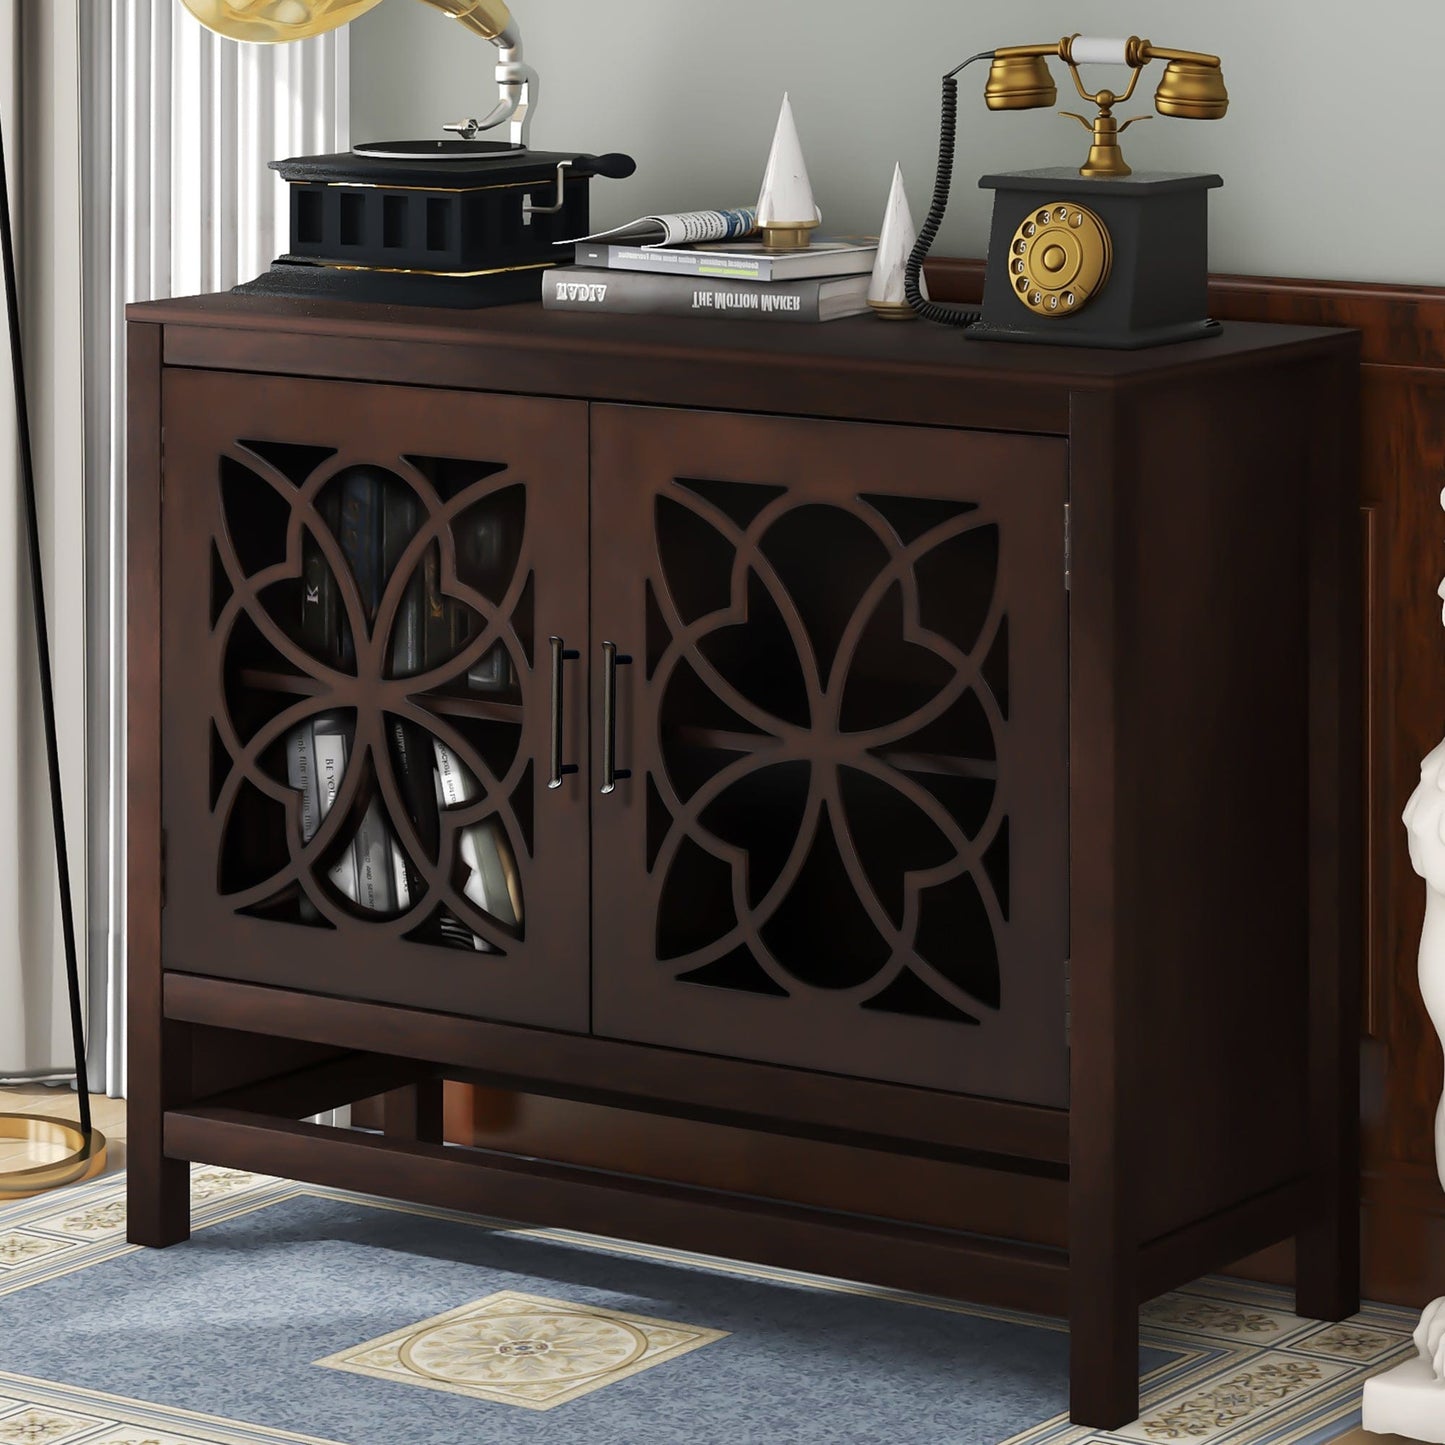 1st Choice Furniture Direct Cabinet 1st Choice Multi-Purpose U-Style Cabinet for Home Storage